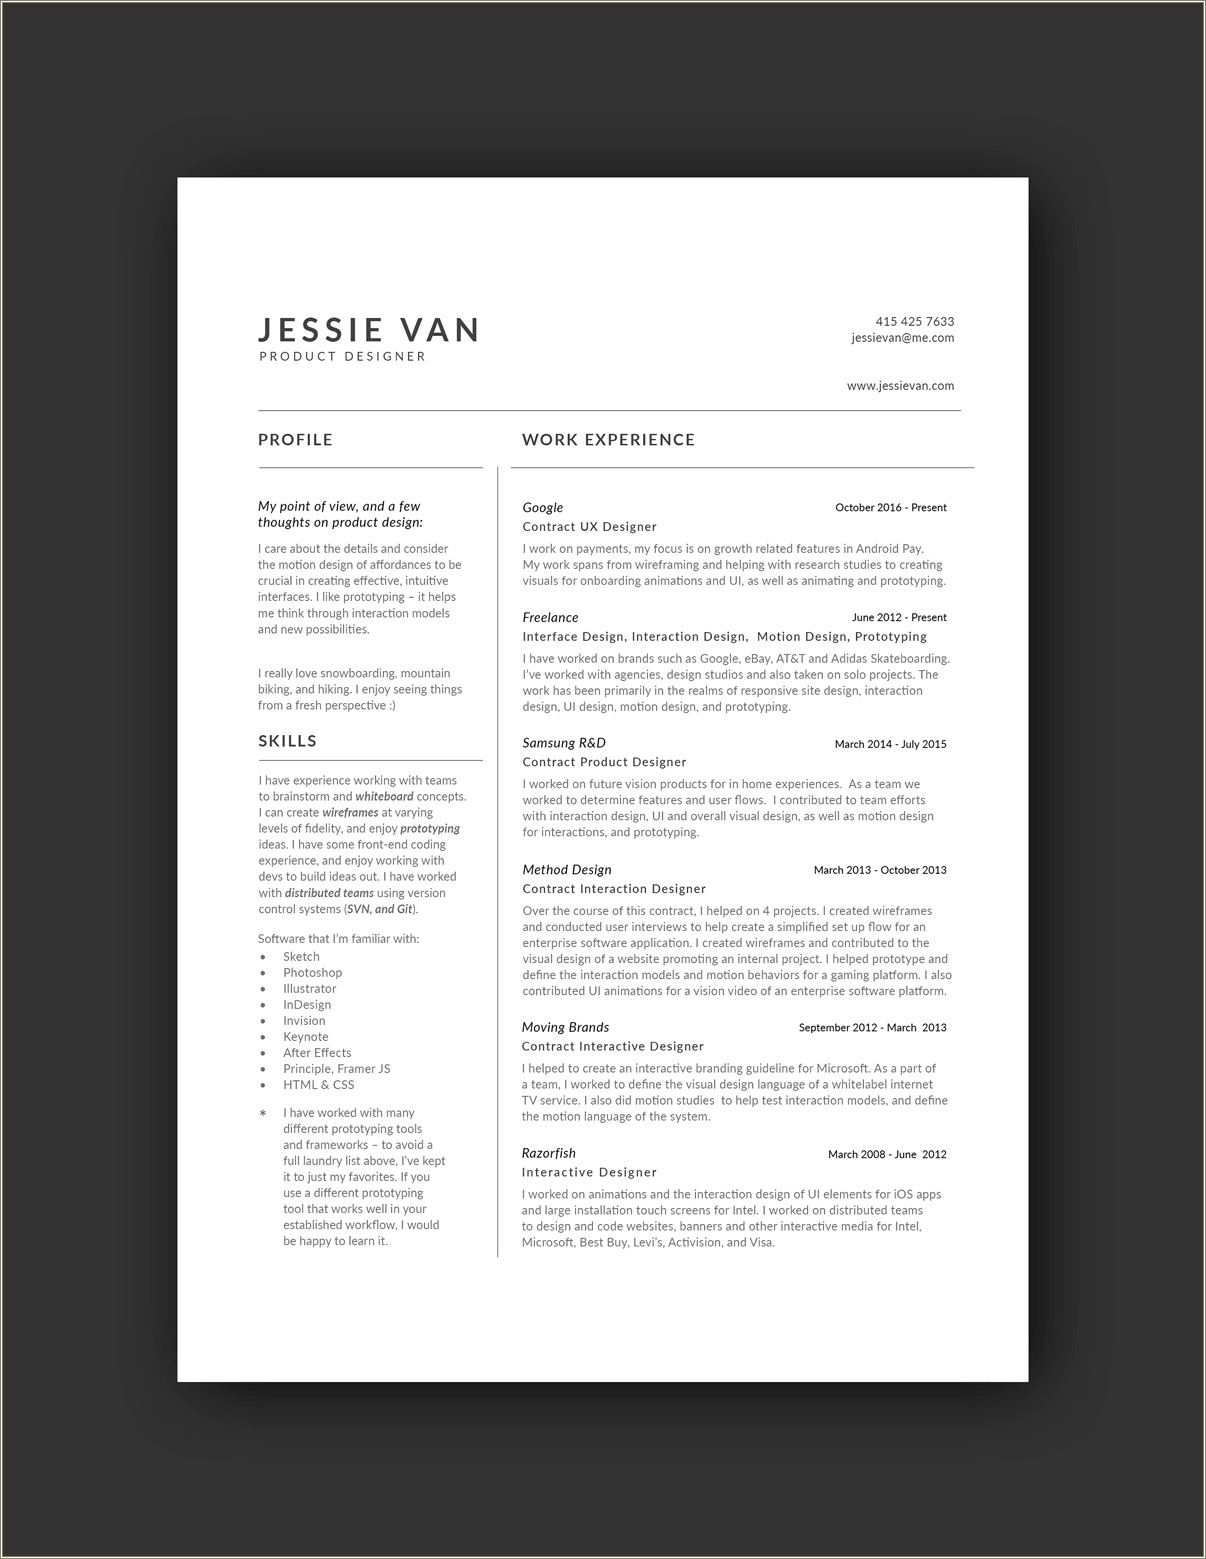 Resume Experience Cut Off Second Page